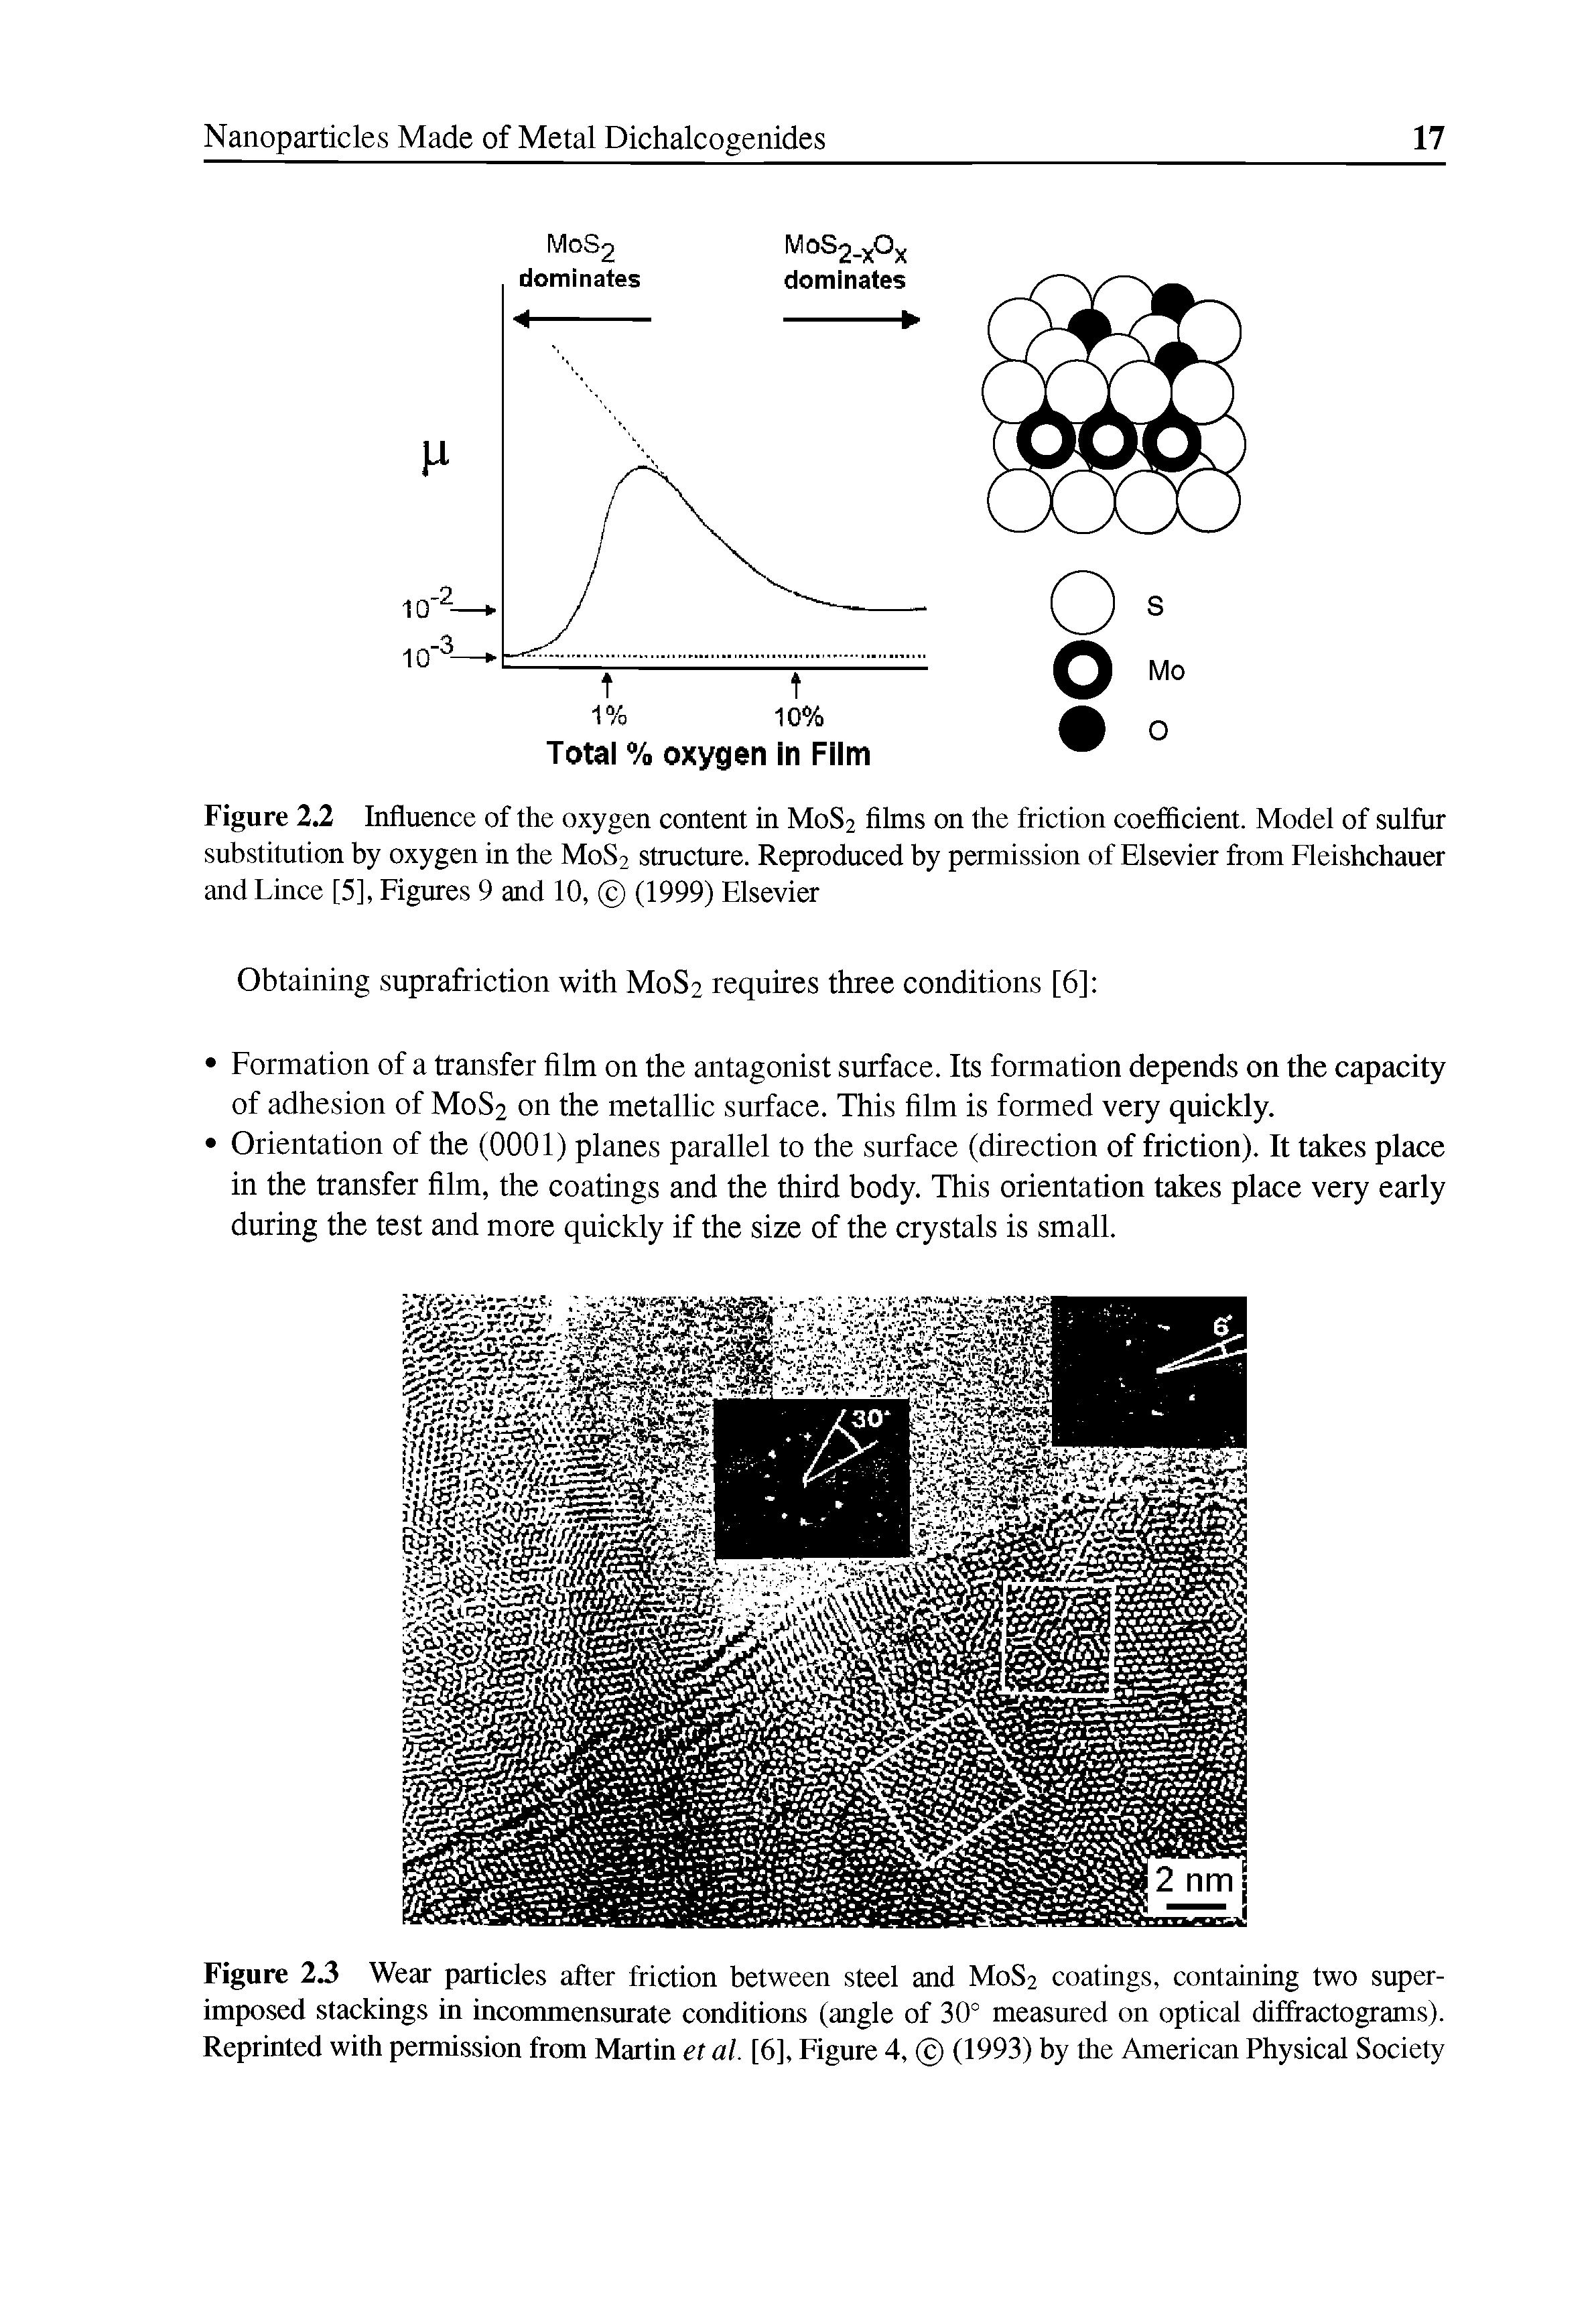 Figure 2.3 Wear particles after friction between steel and M0S2 coatings, containing two superimposed stackings in incommensurate conditions (angle of 30° measured on optical diffractograms). Reprinted with perimssion from Martin et al. [6], Figure 4, (1993) by the American Physical Society...